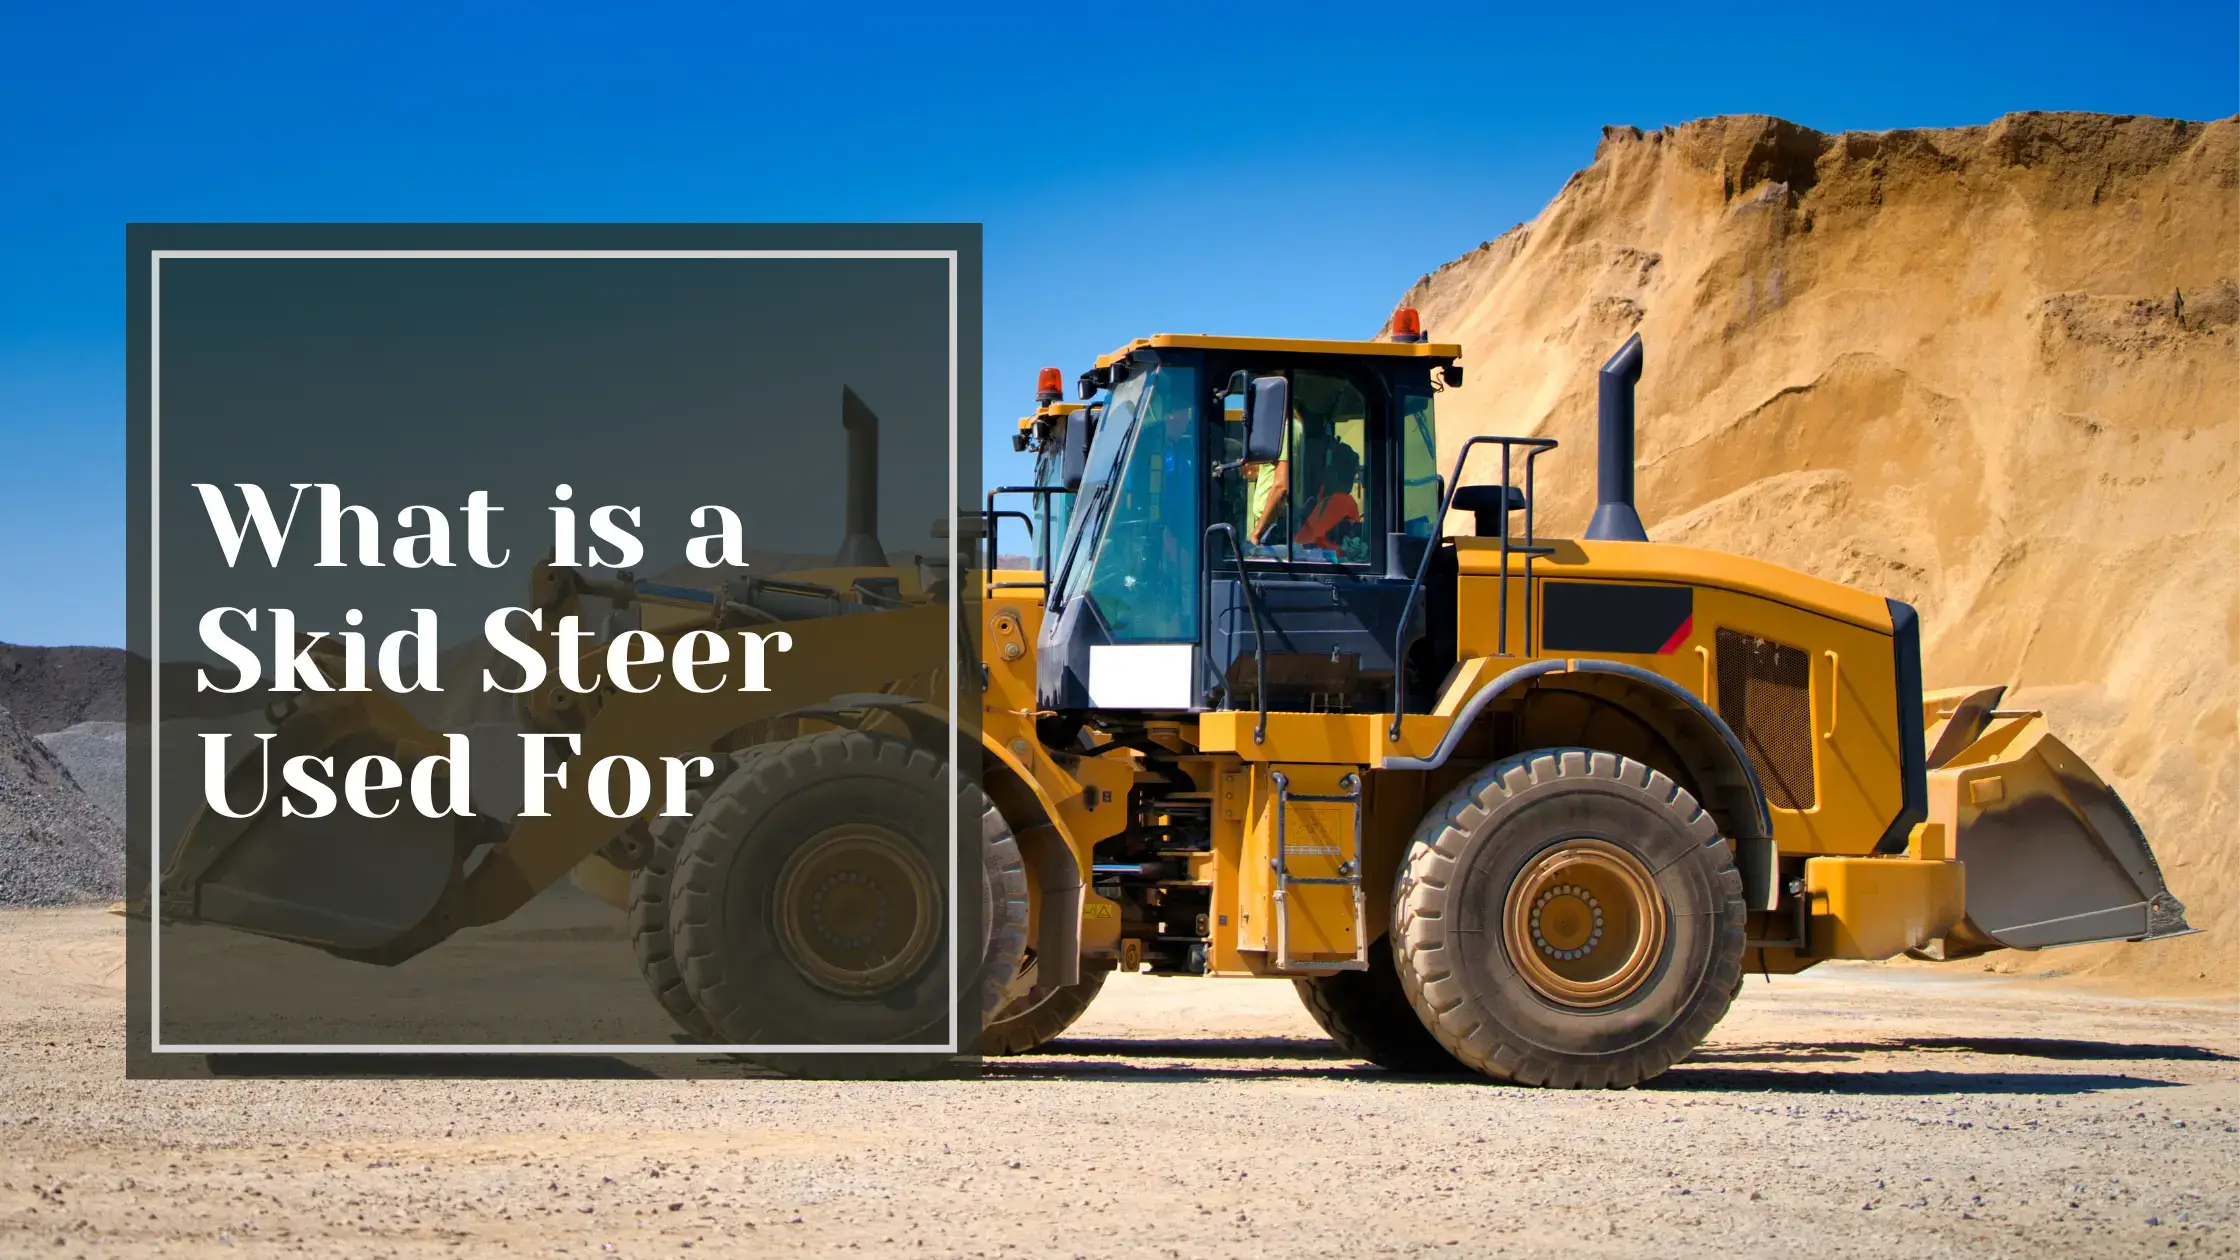 What is a Skid Steer Used For